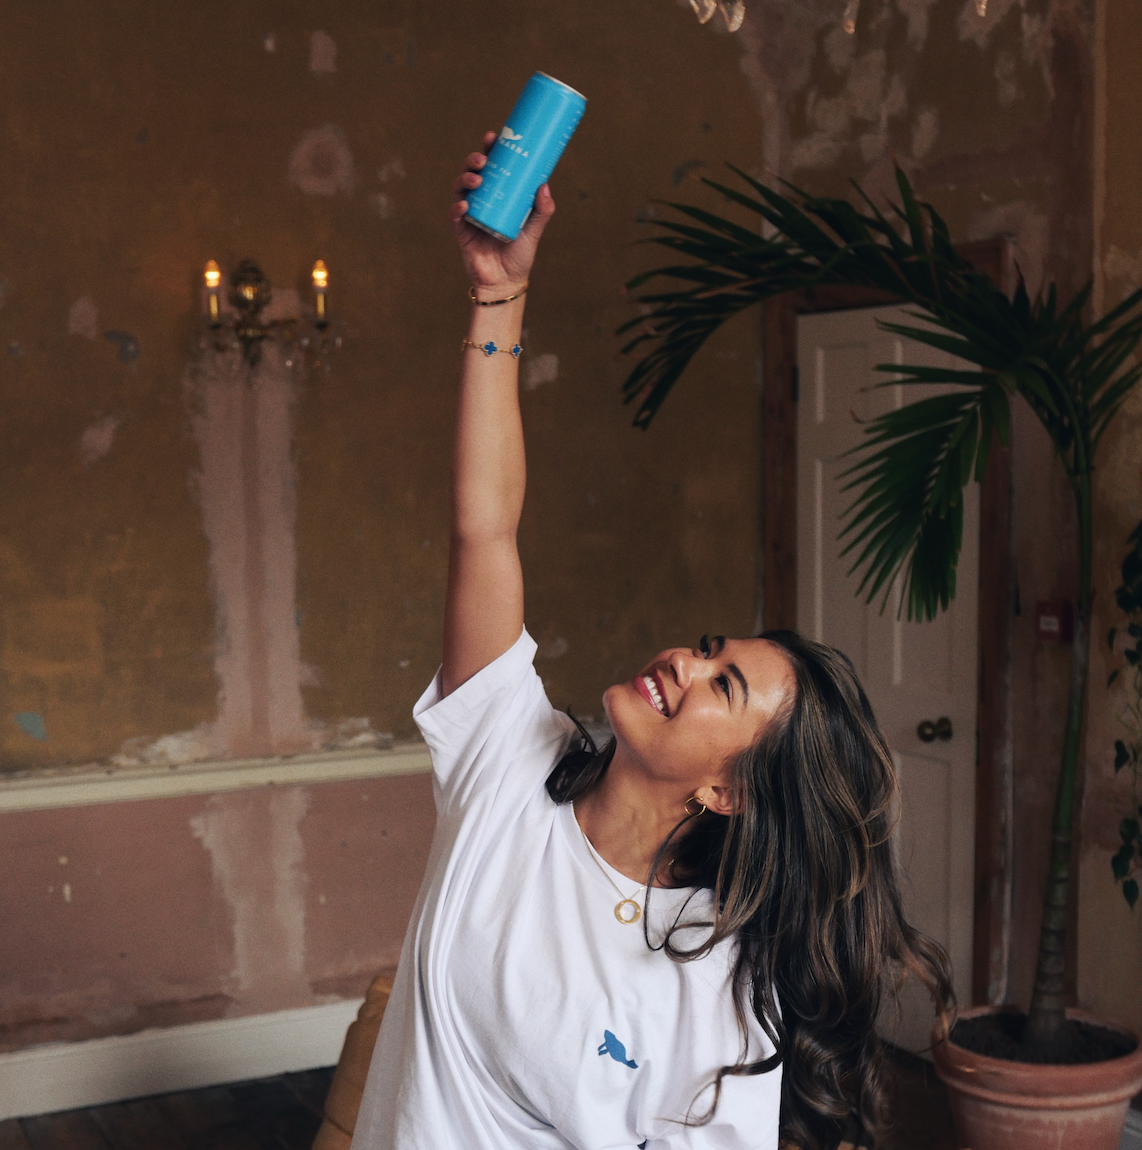 Woman smiling and holding up a blue can in a room with a plant.